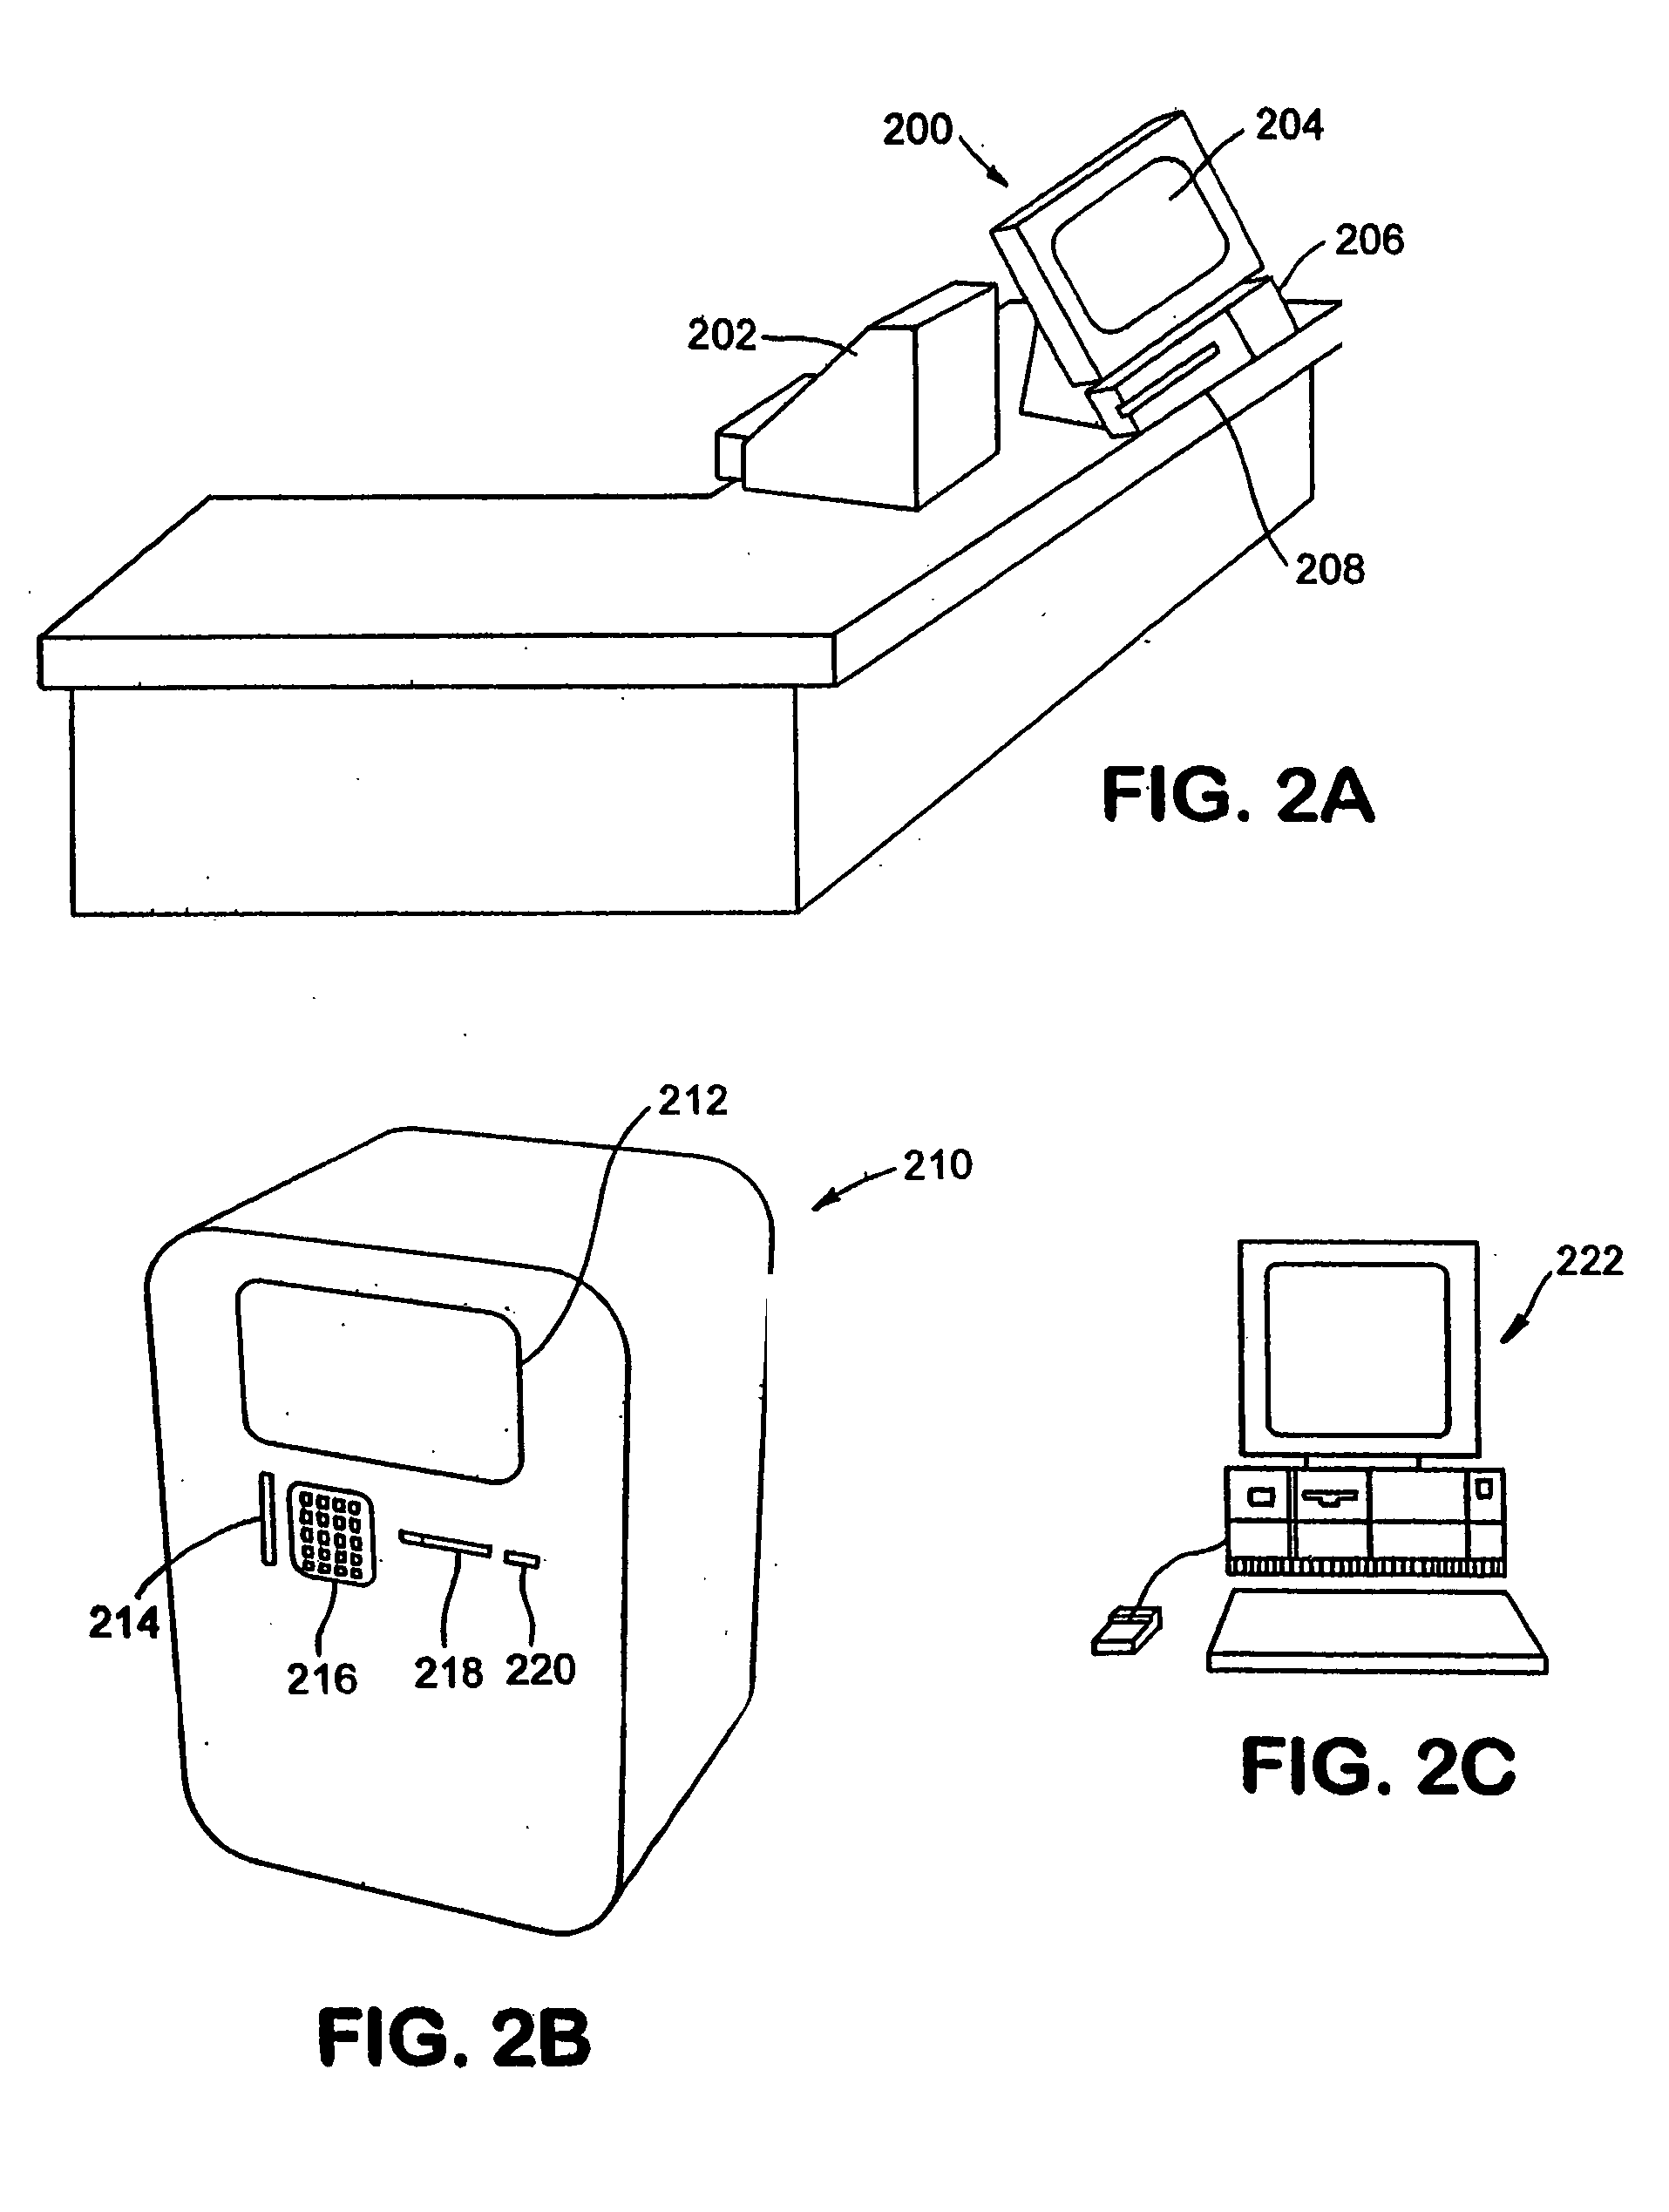 System and method for distributing personal identification numbers over a computer network